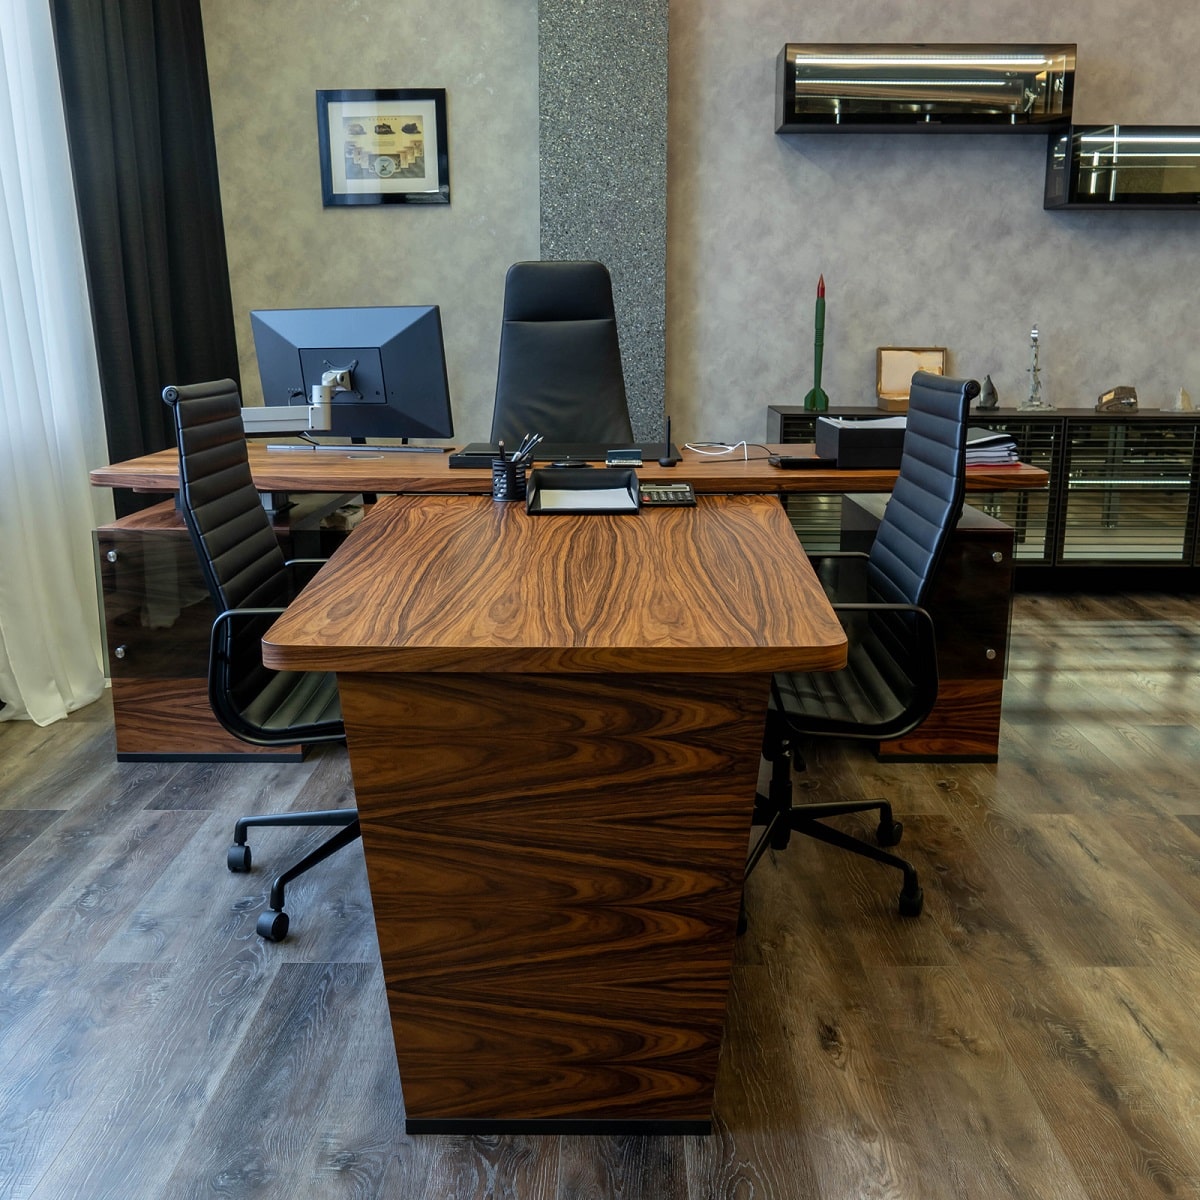 Metallurgical company's top manager office